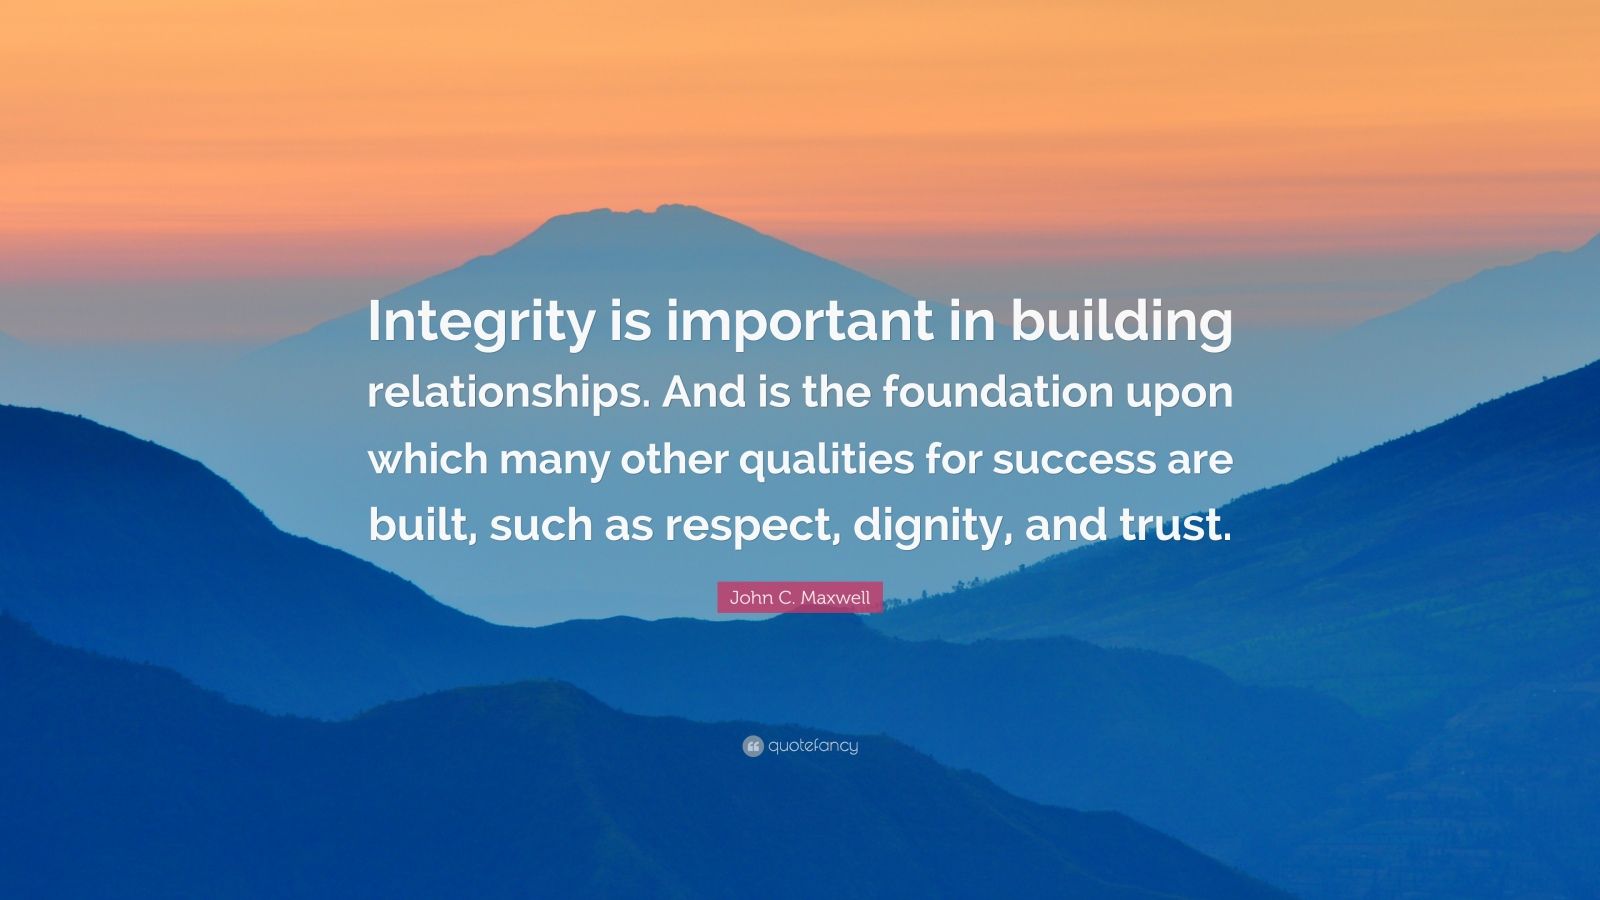 John C. Maxwell Quote: “Integrity is important in building